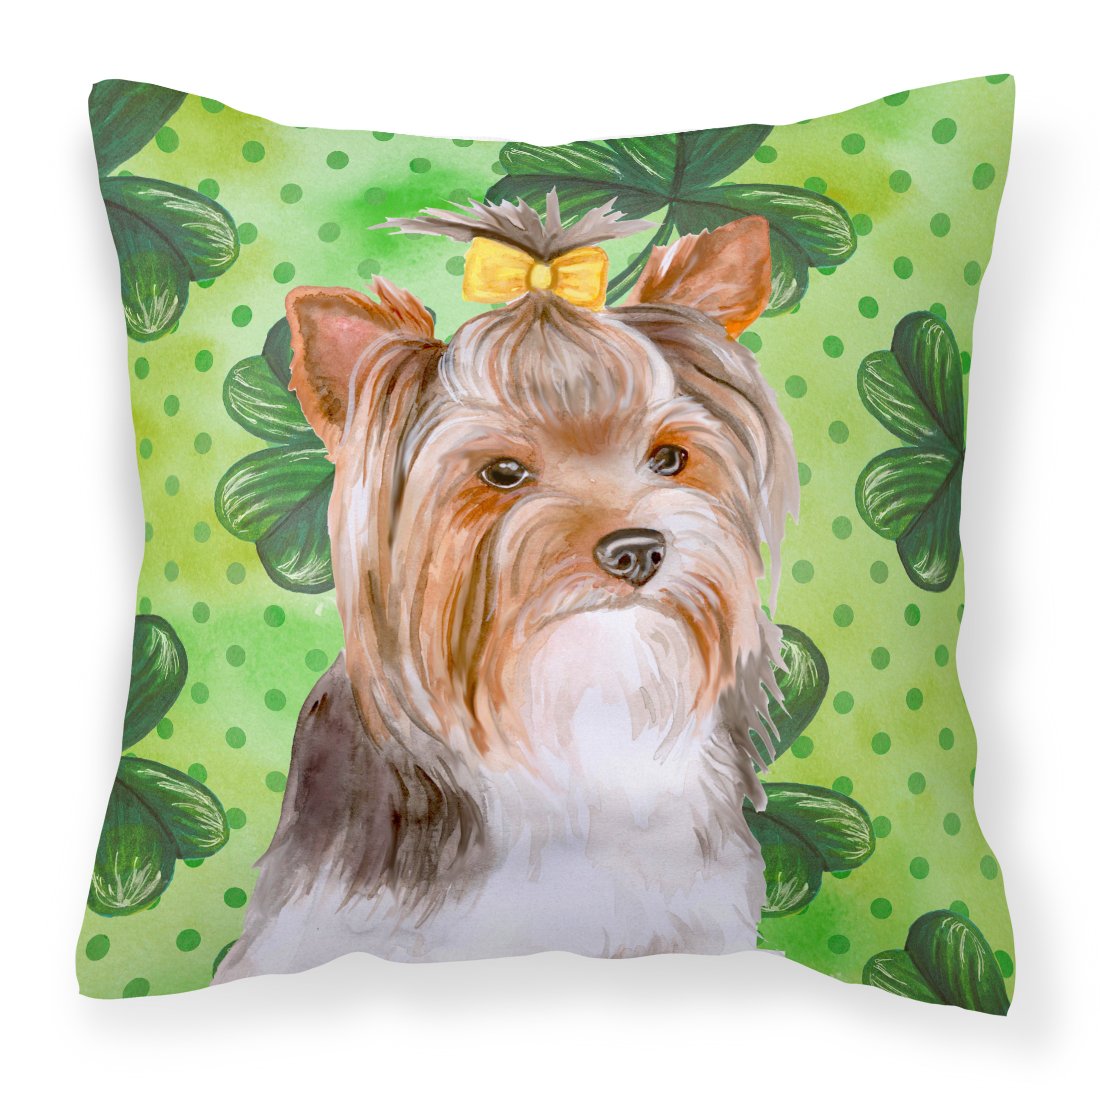 Yorkshire Terrier #2 St Patrick's Fabric Decorative Pillow BB9897PW1818 by Caroline's Treasures